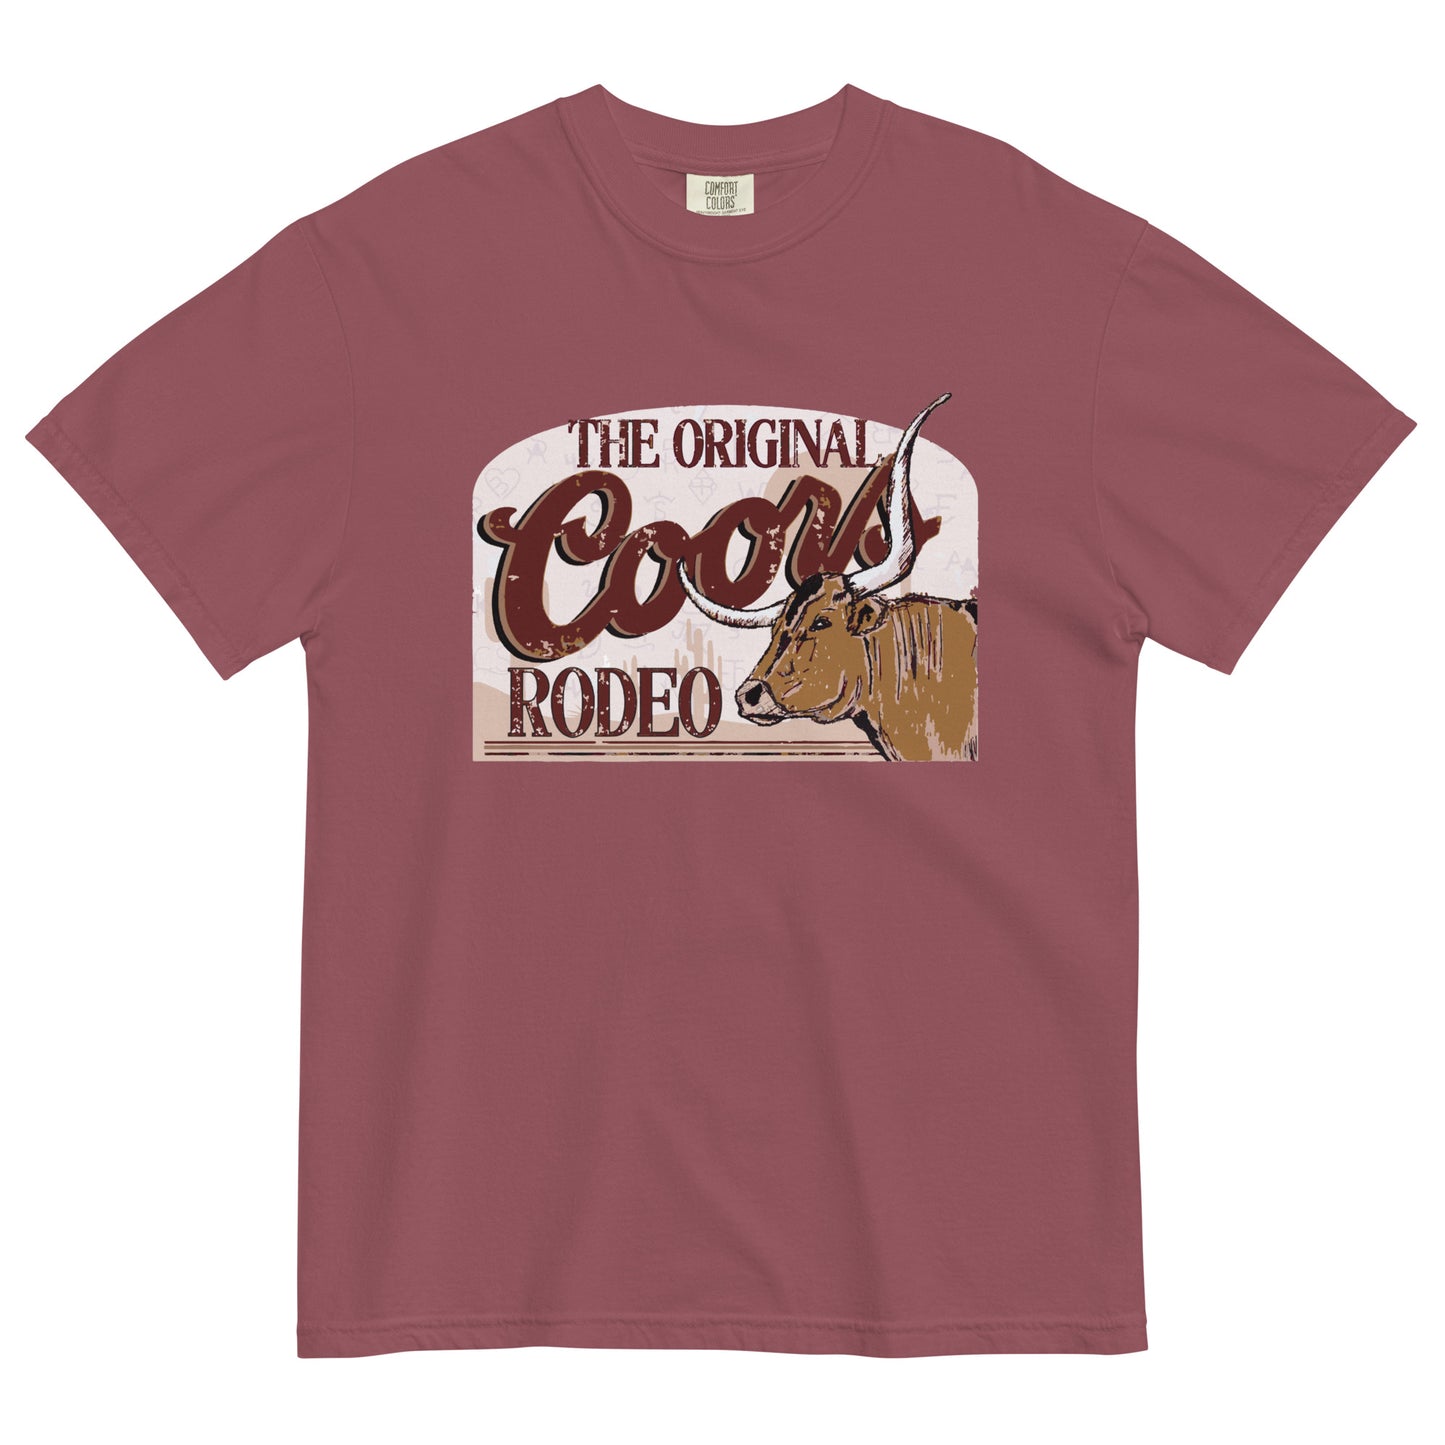 Coors Rodeo Comfort Colors Graphic Tee